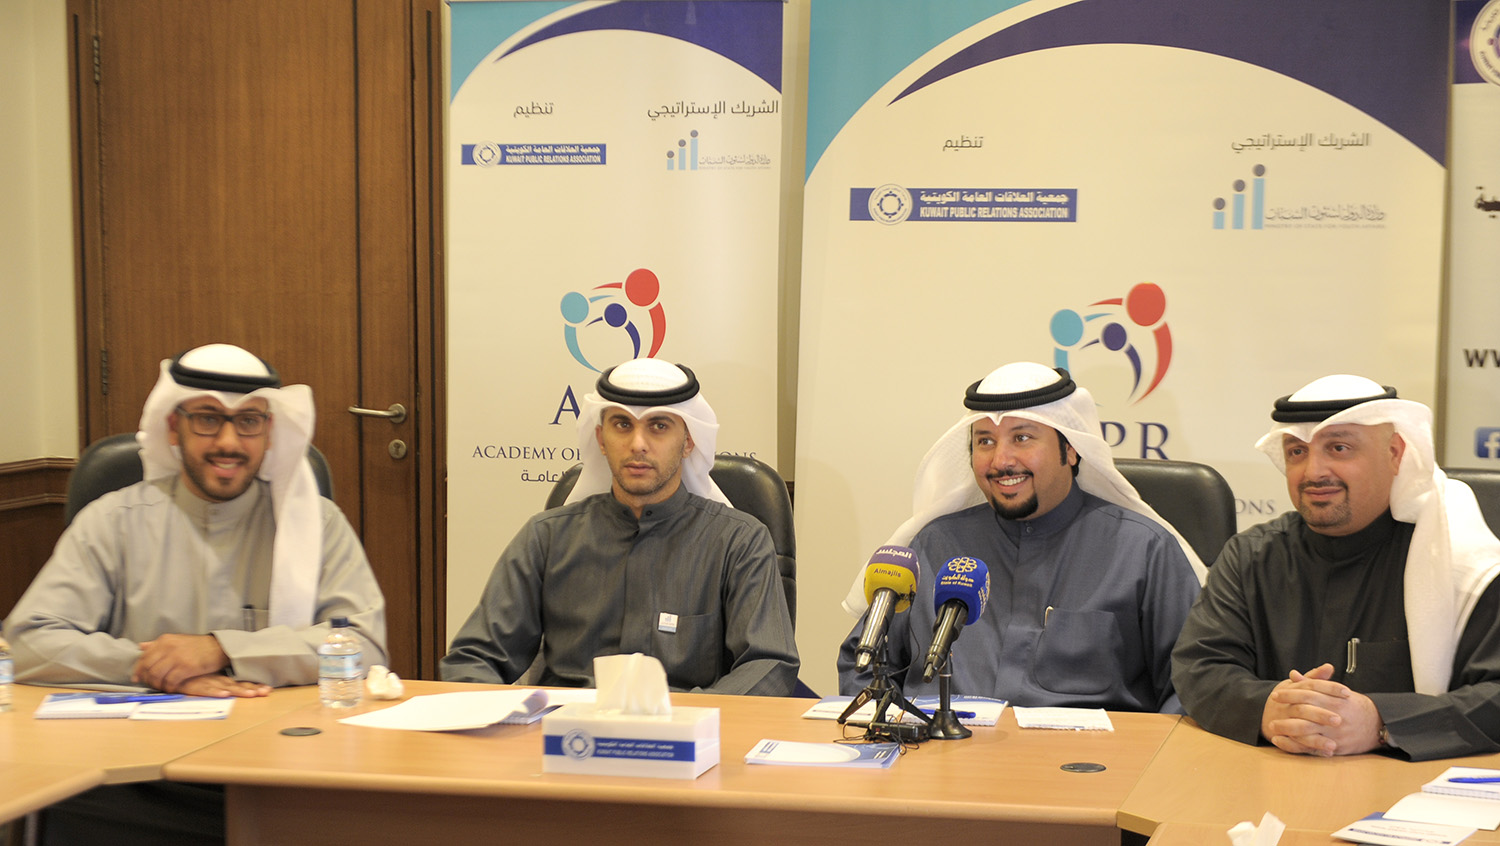 The Kuwait Public Relations Association (KPRA) in press conference